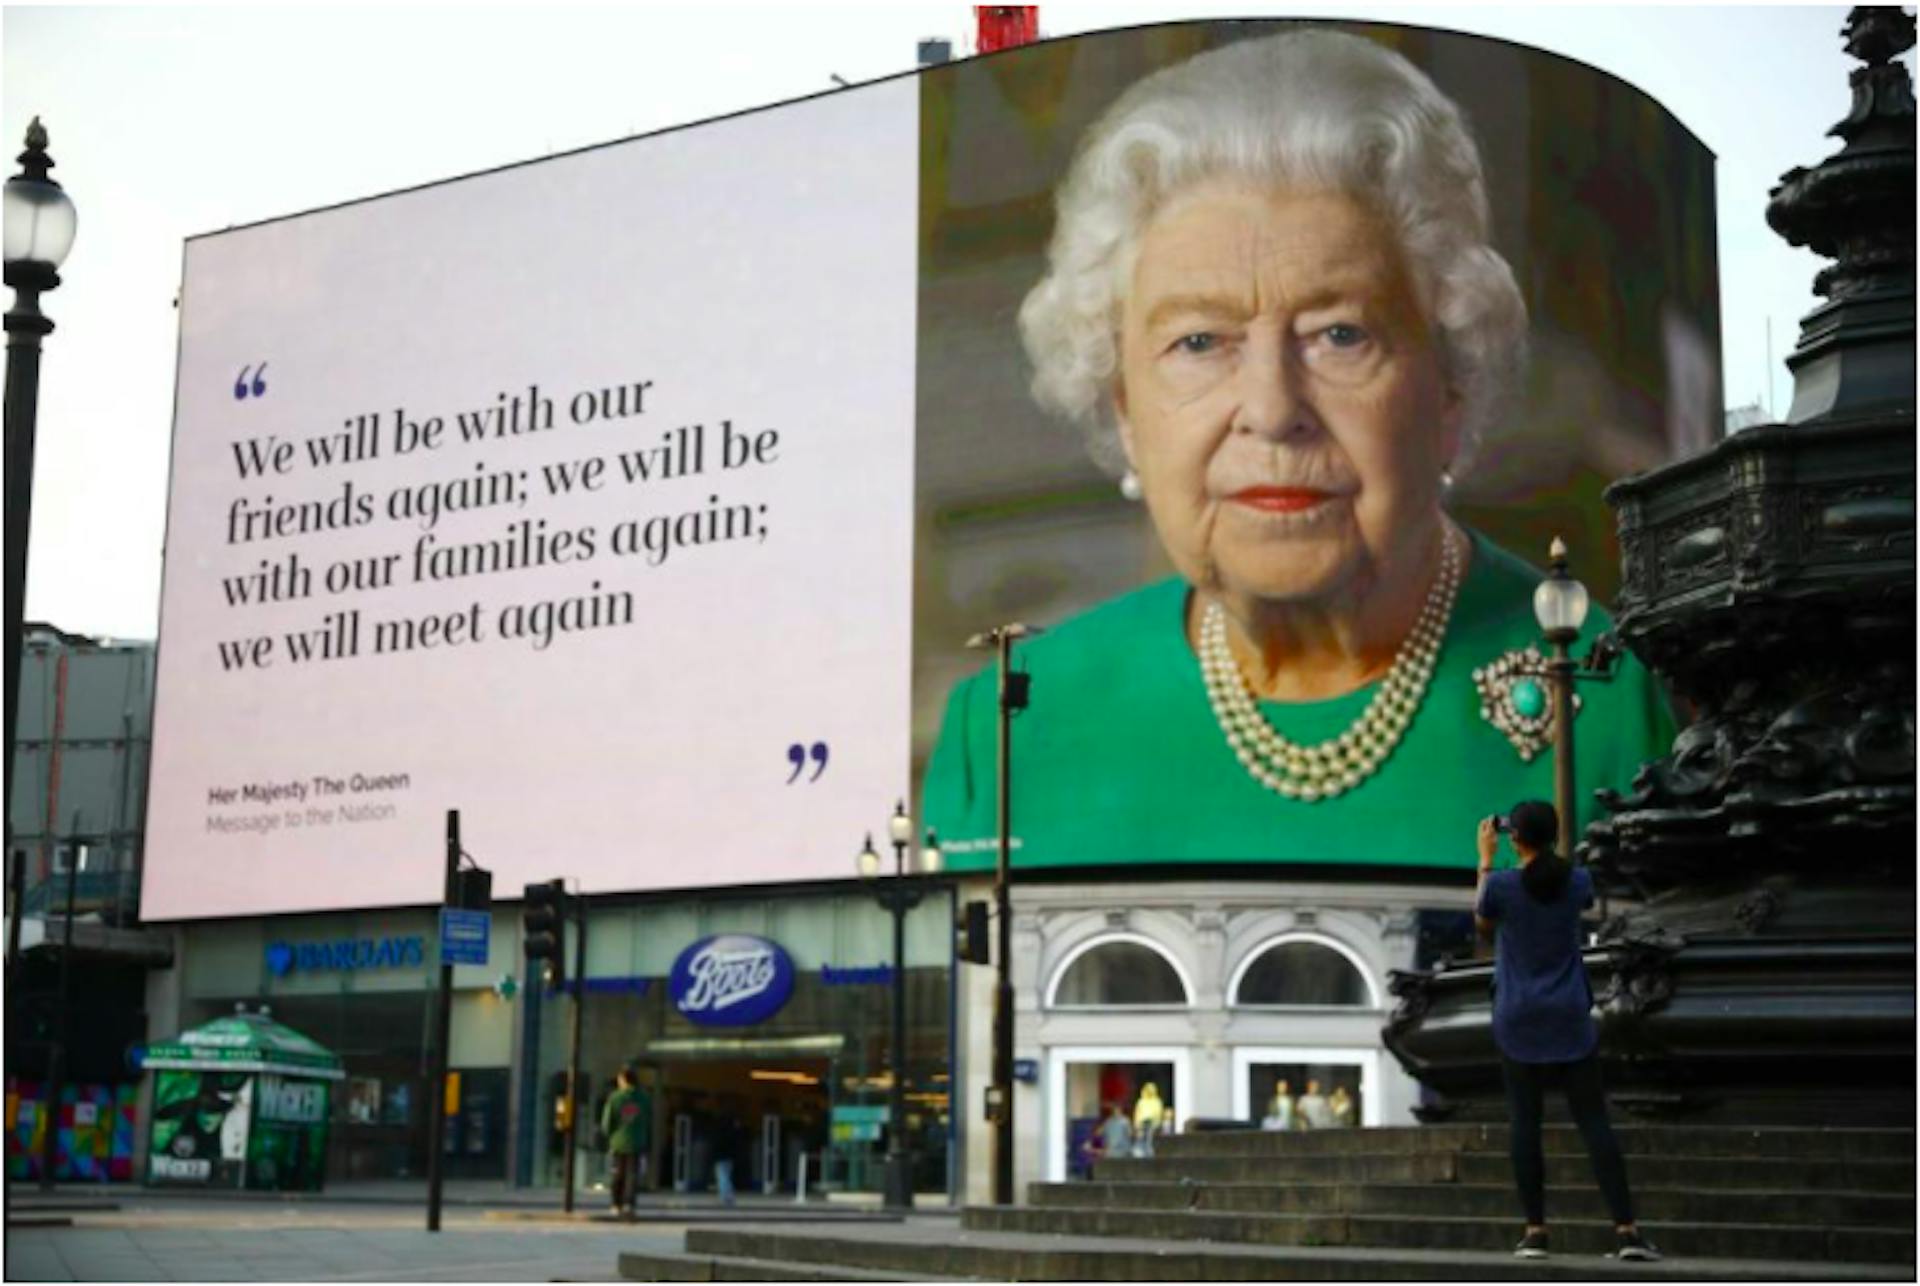 Queen Elizabeth II’s message of hope in Piccadilly Circus